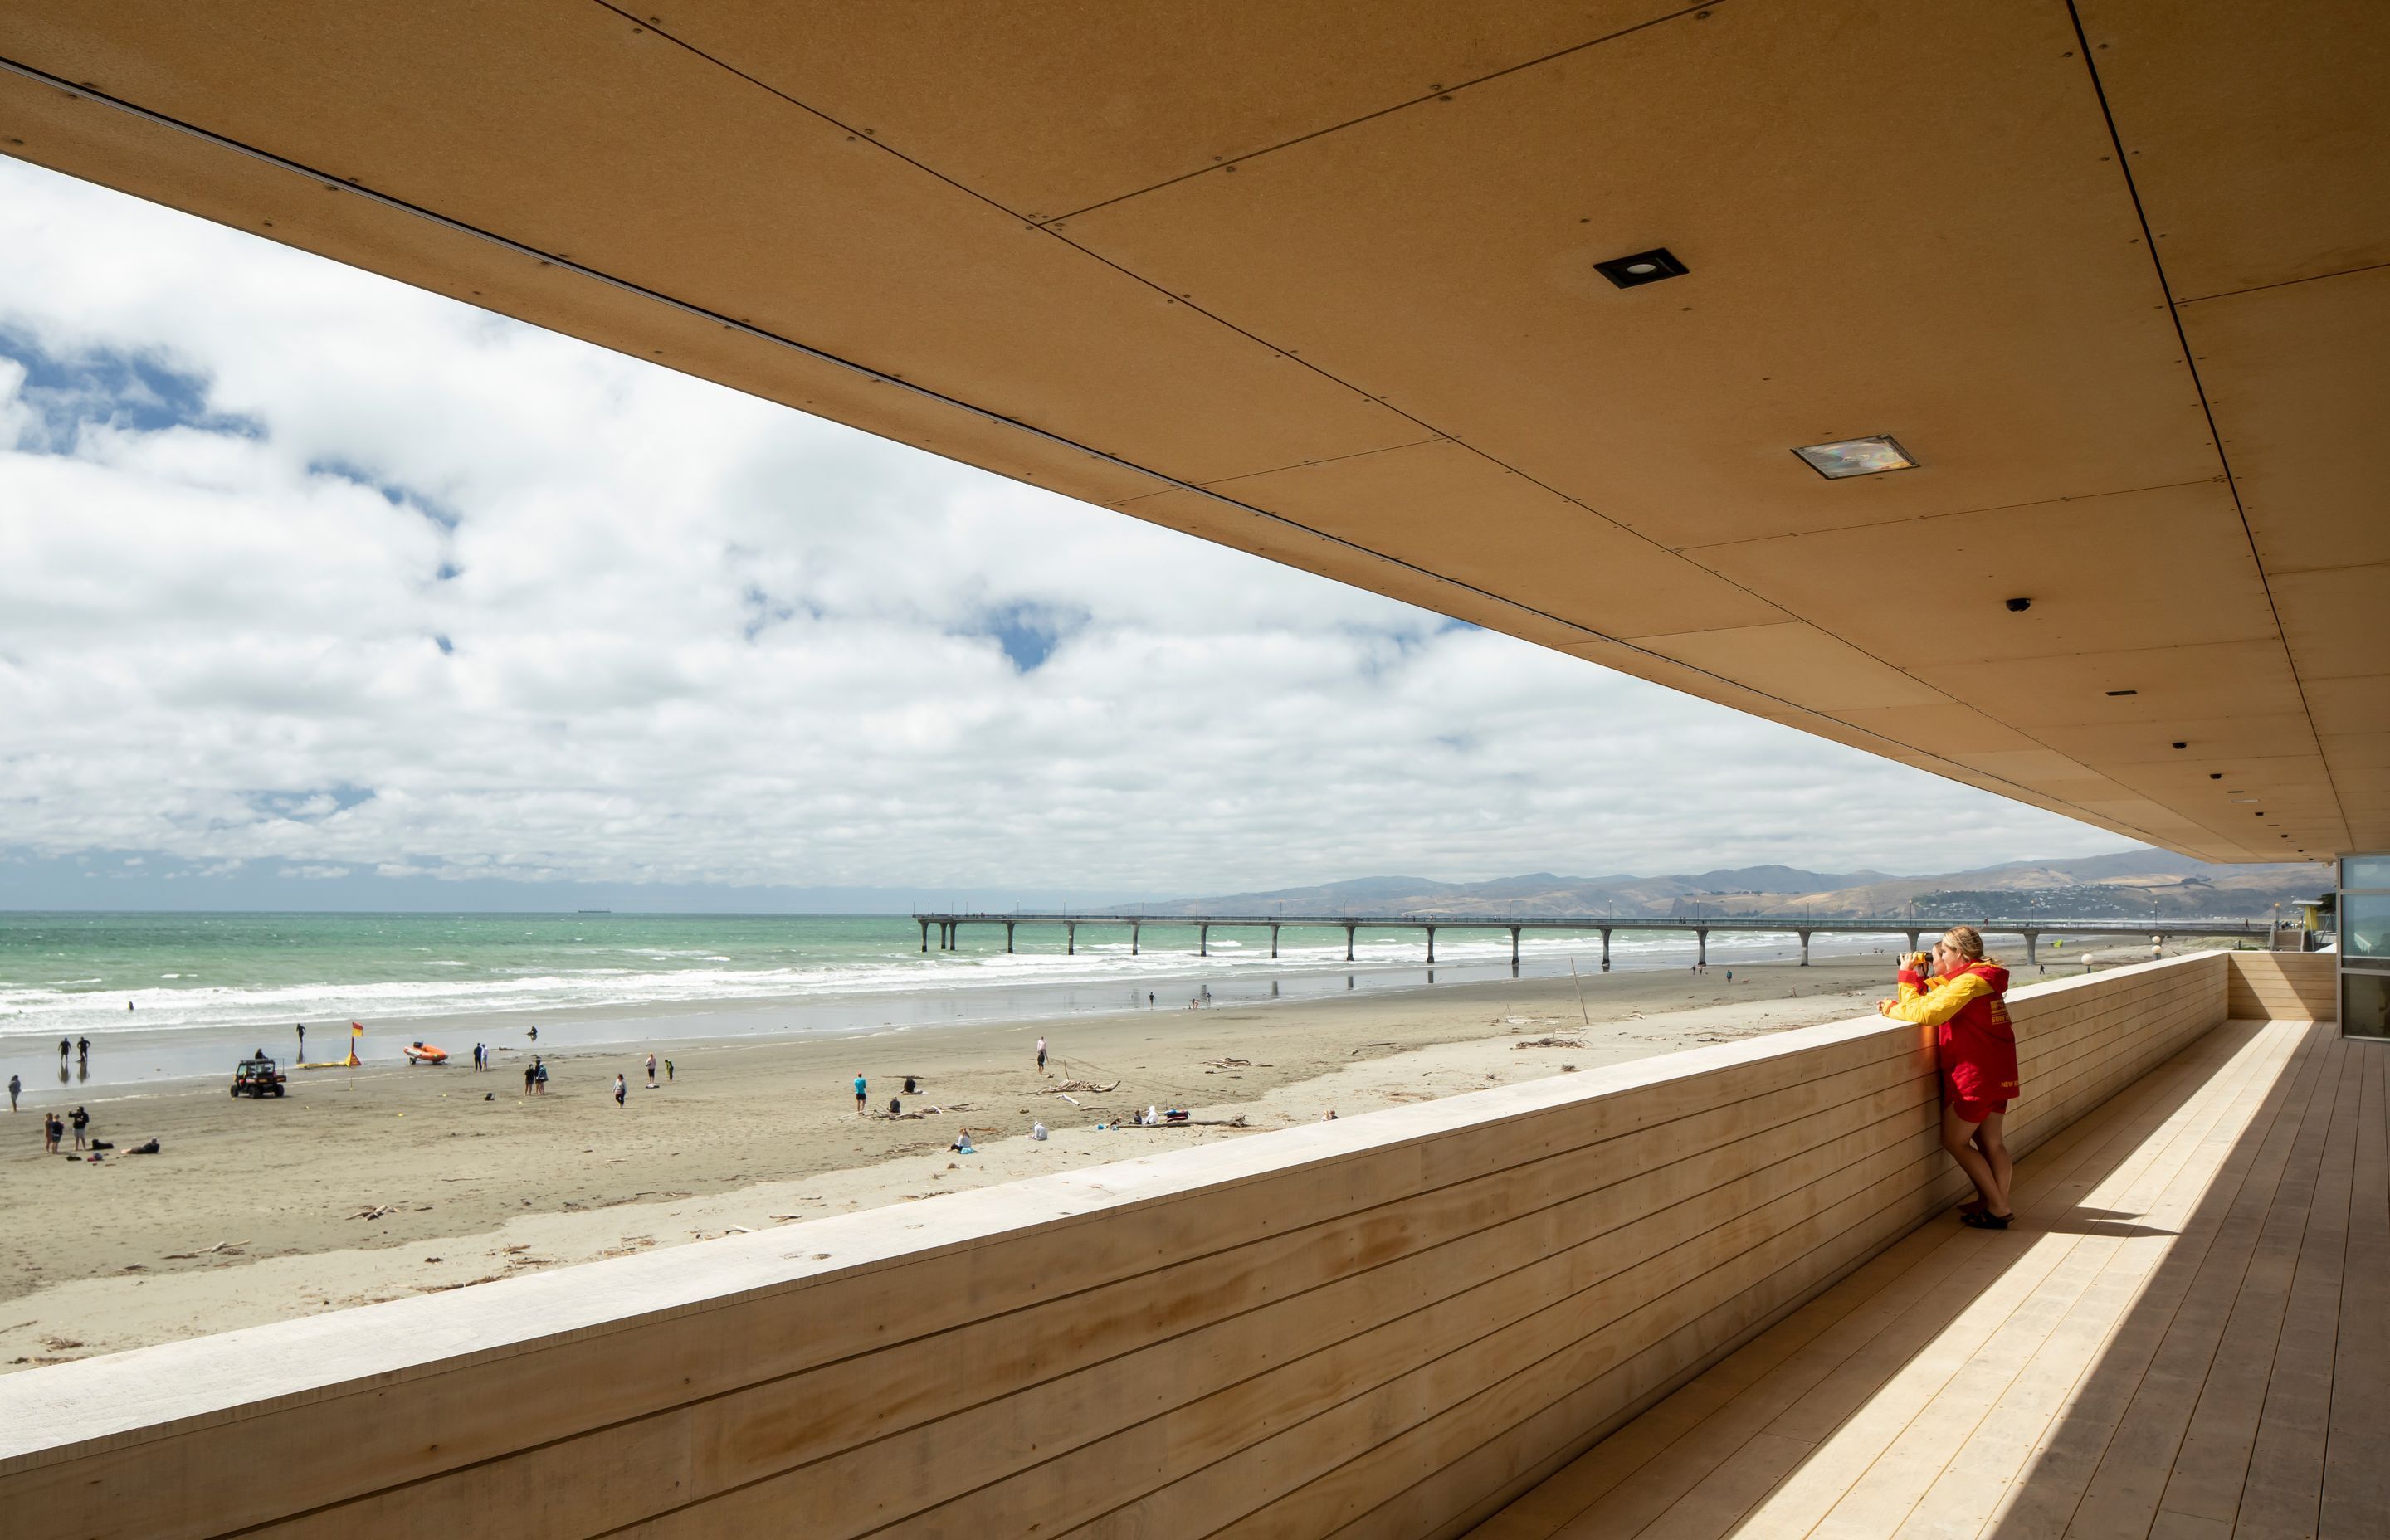 The covered decking area on the first floor is where lifeguards on duty scan the beach. From there they can action any emergency response easily, without having to cross paths with the public.